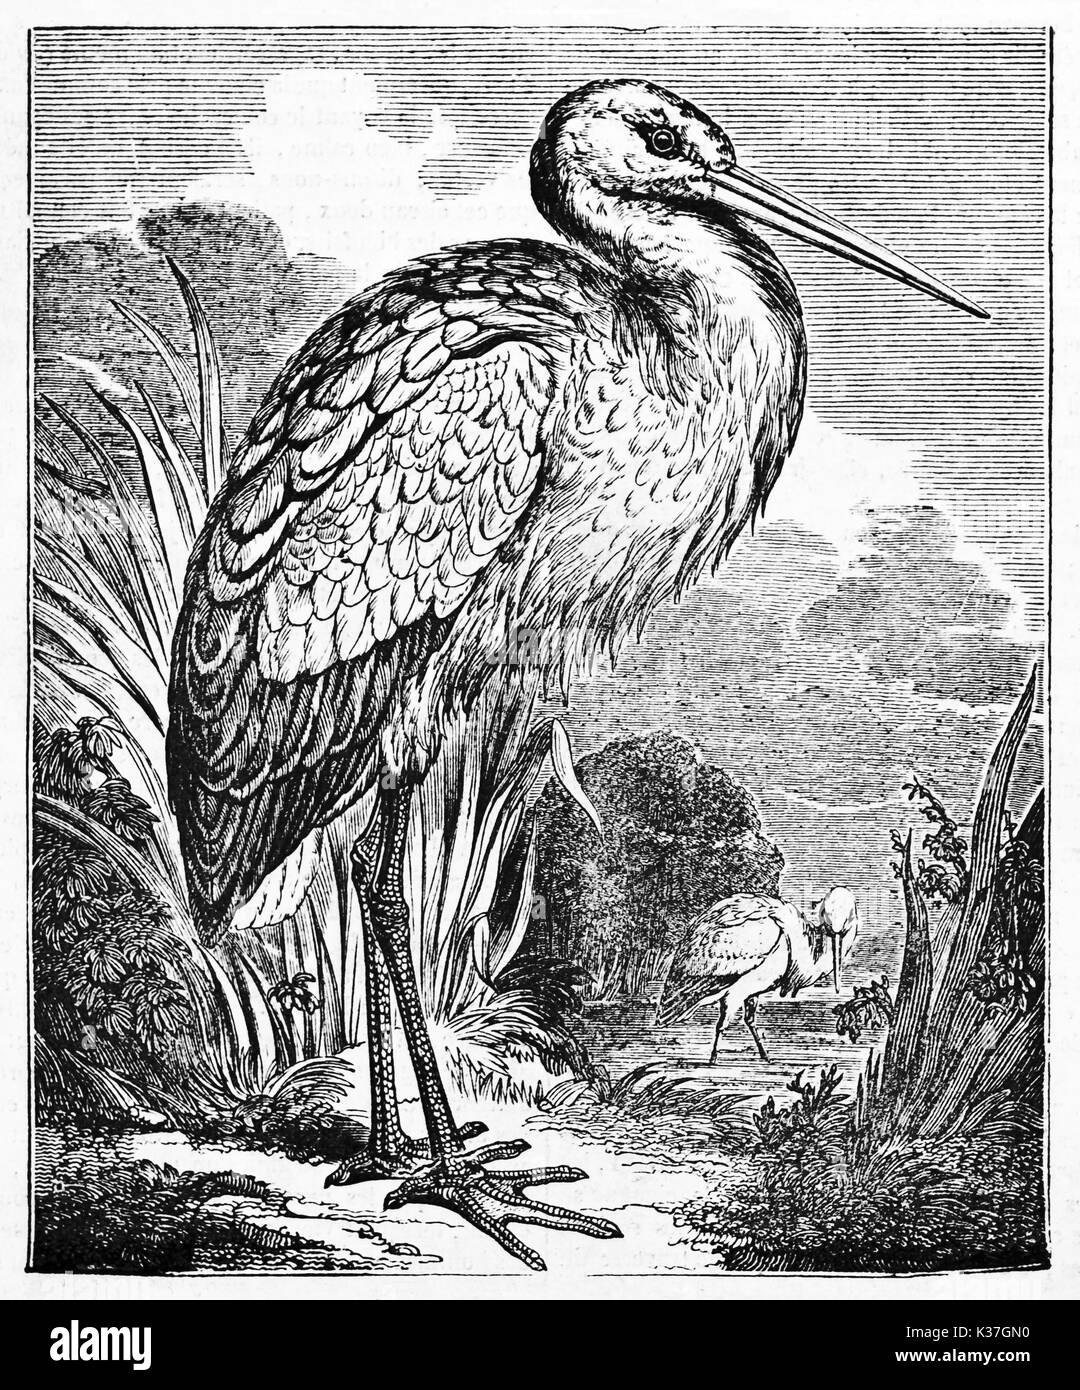 White Stork (Ciconia ciconia) resting in his natural environment. Old Illustration by unidentified author published on Magasin Pittoresque Paris 1834 Stock Photo